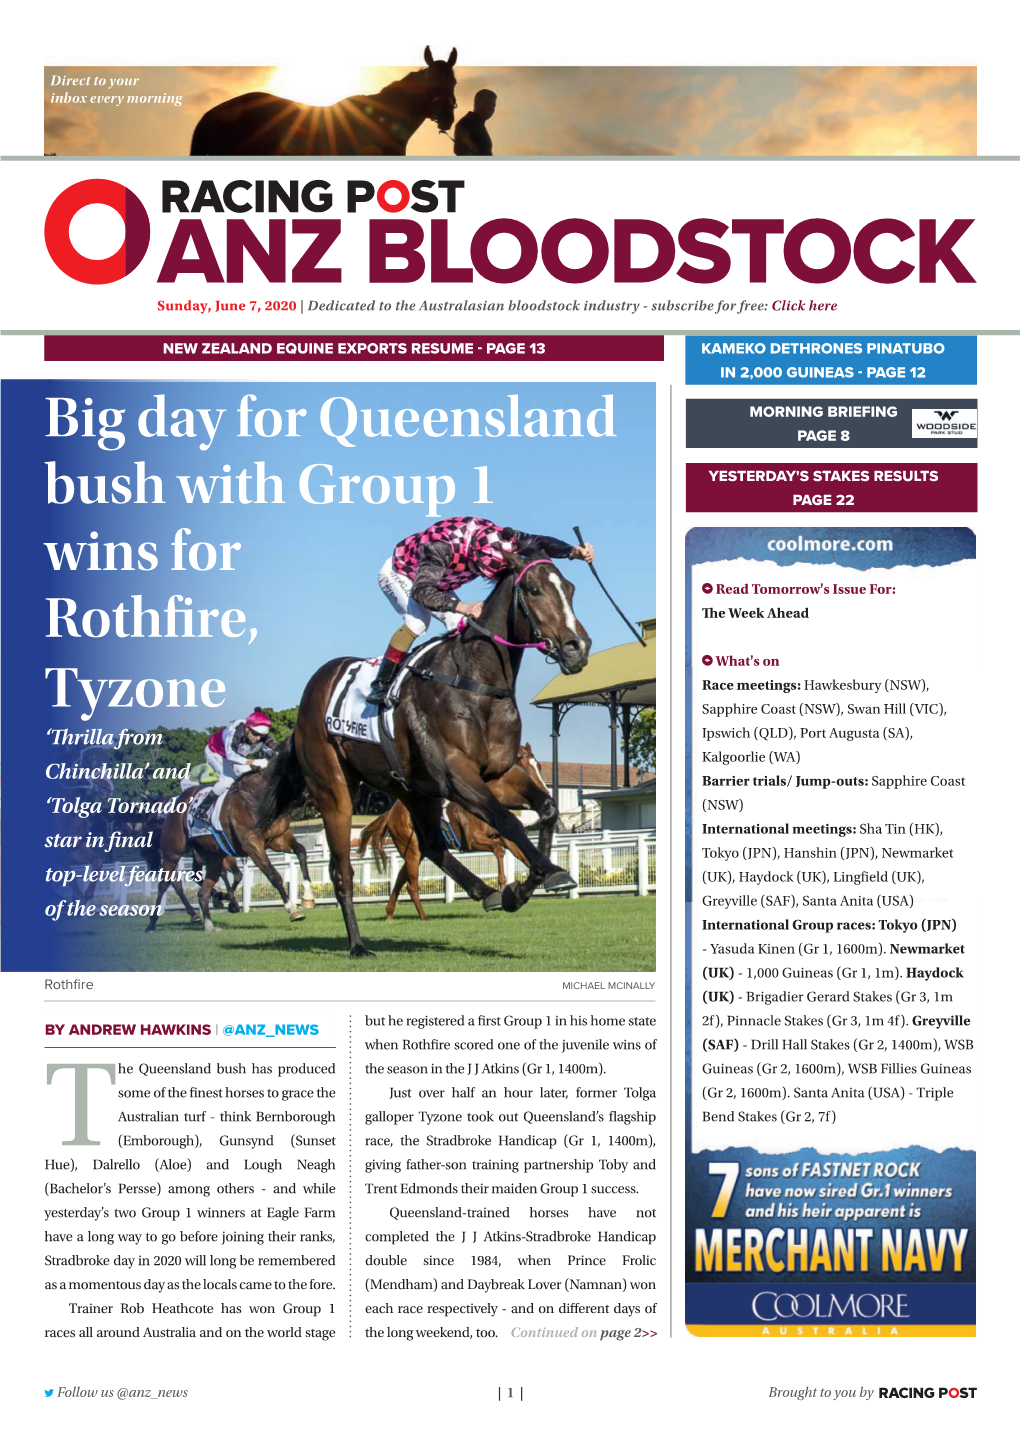 Big Day for Queensland Bush with Group 1 Wins for Rothfire, Tyzone | 2 | Sunday, June 7, 2020